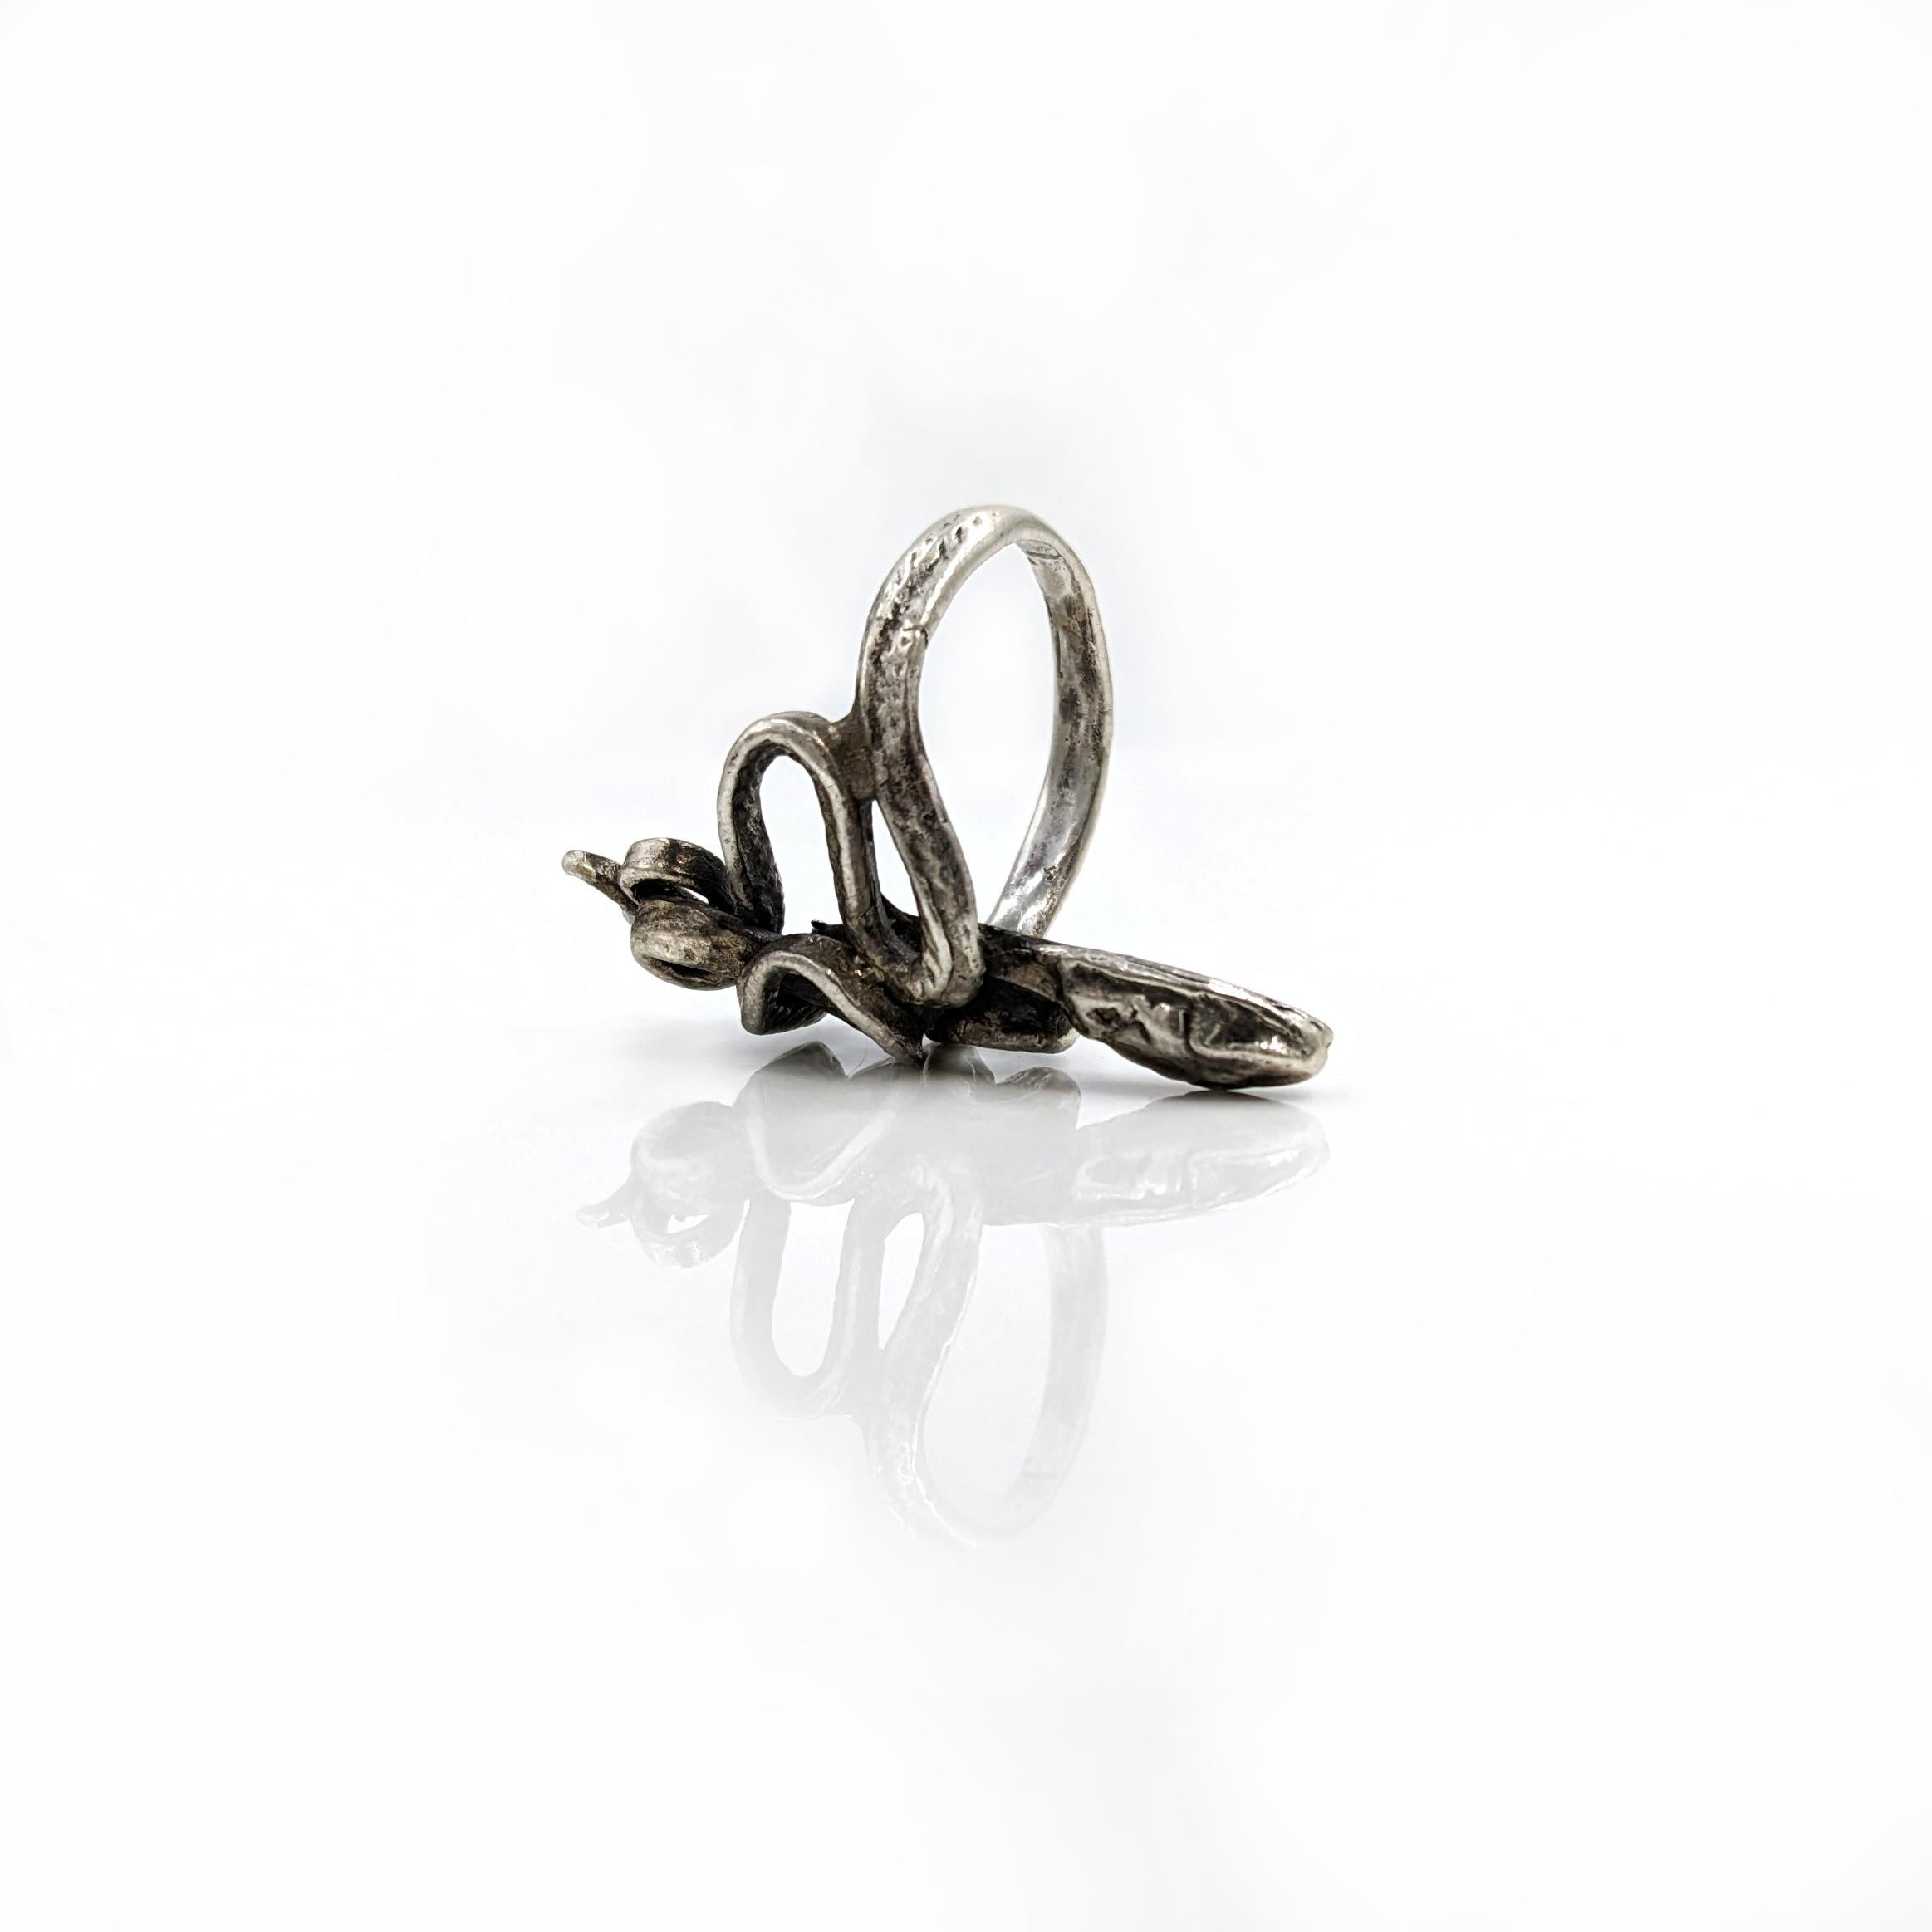 Step into the world of exquisite craftsmanship with the Serpentine Ring in sterling silver. Each piece is meticulously crafted in Asheville, NC. The serpentine design, formed using the lost wax casting method, adds a touch of timeless elegance to